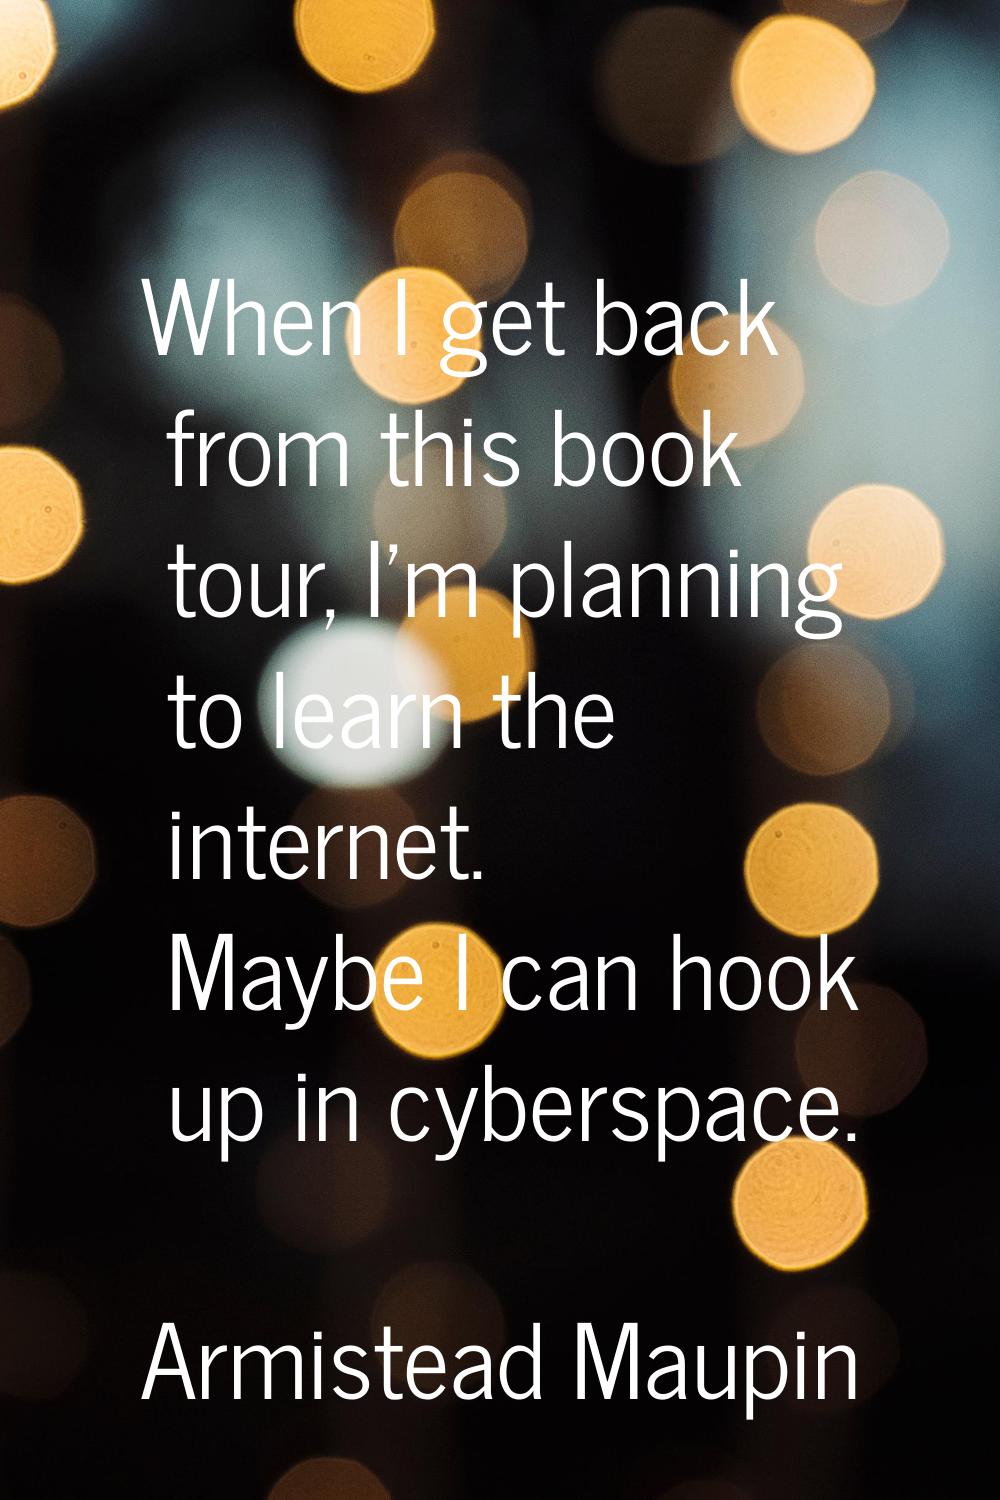 When I get back from this book tour, I'm planning to learn the internet. Maybe I can hook up in cyb